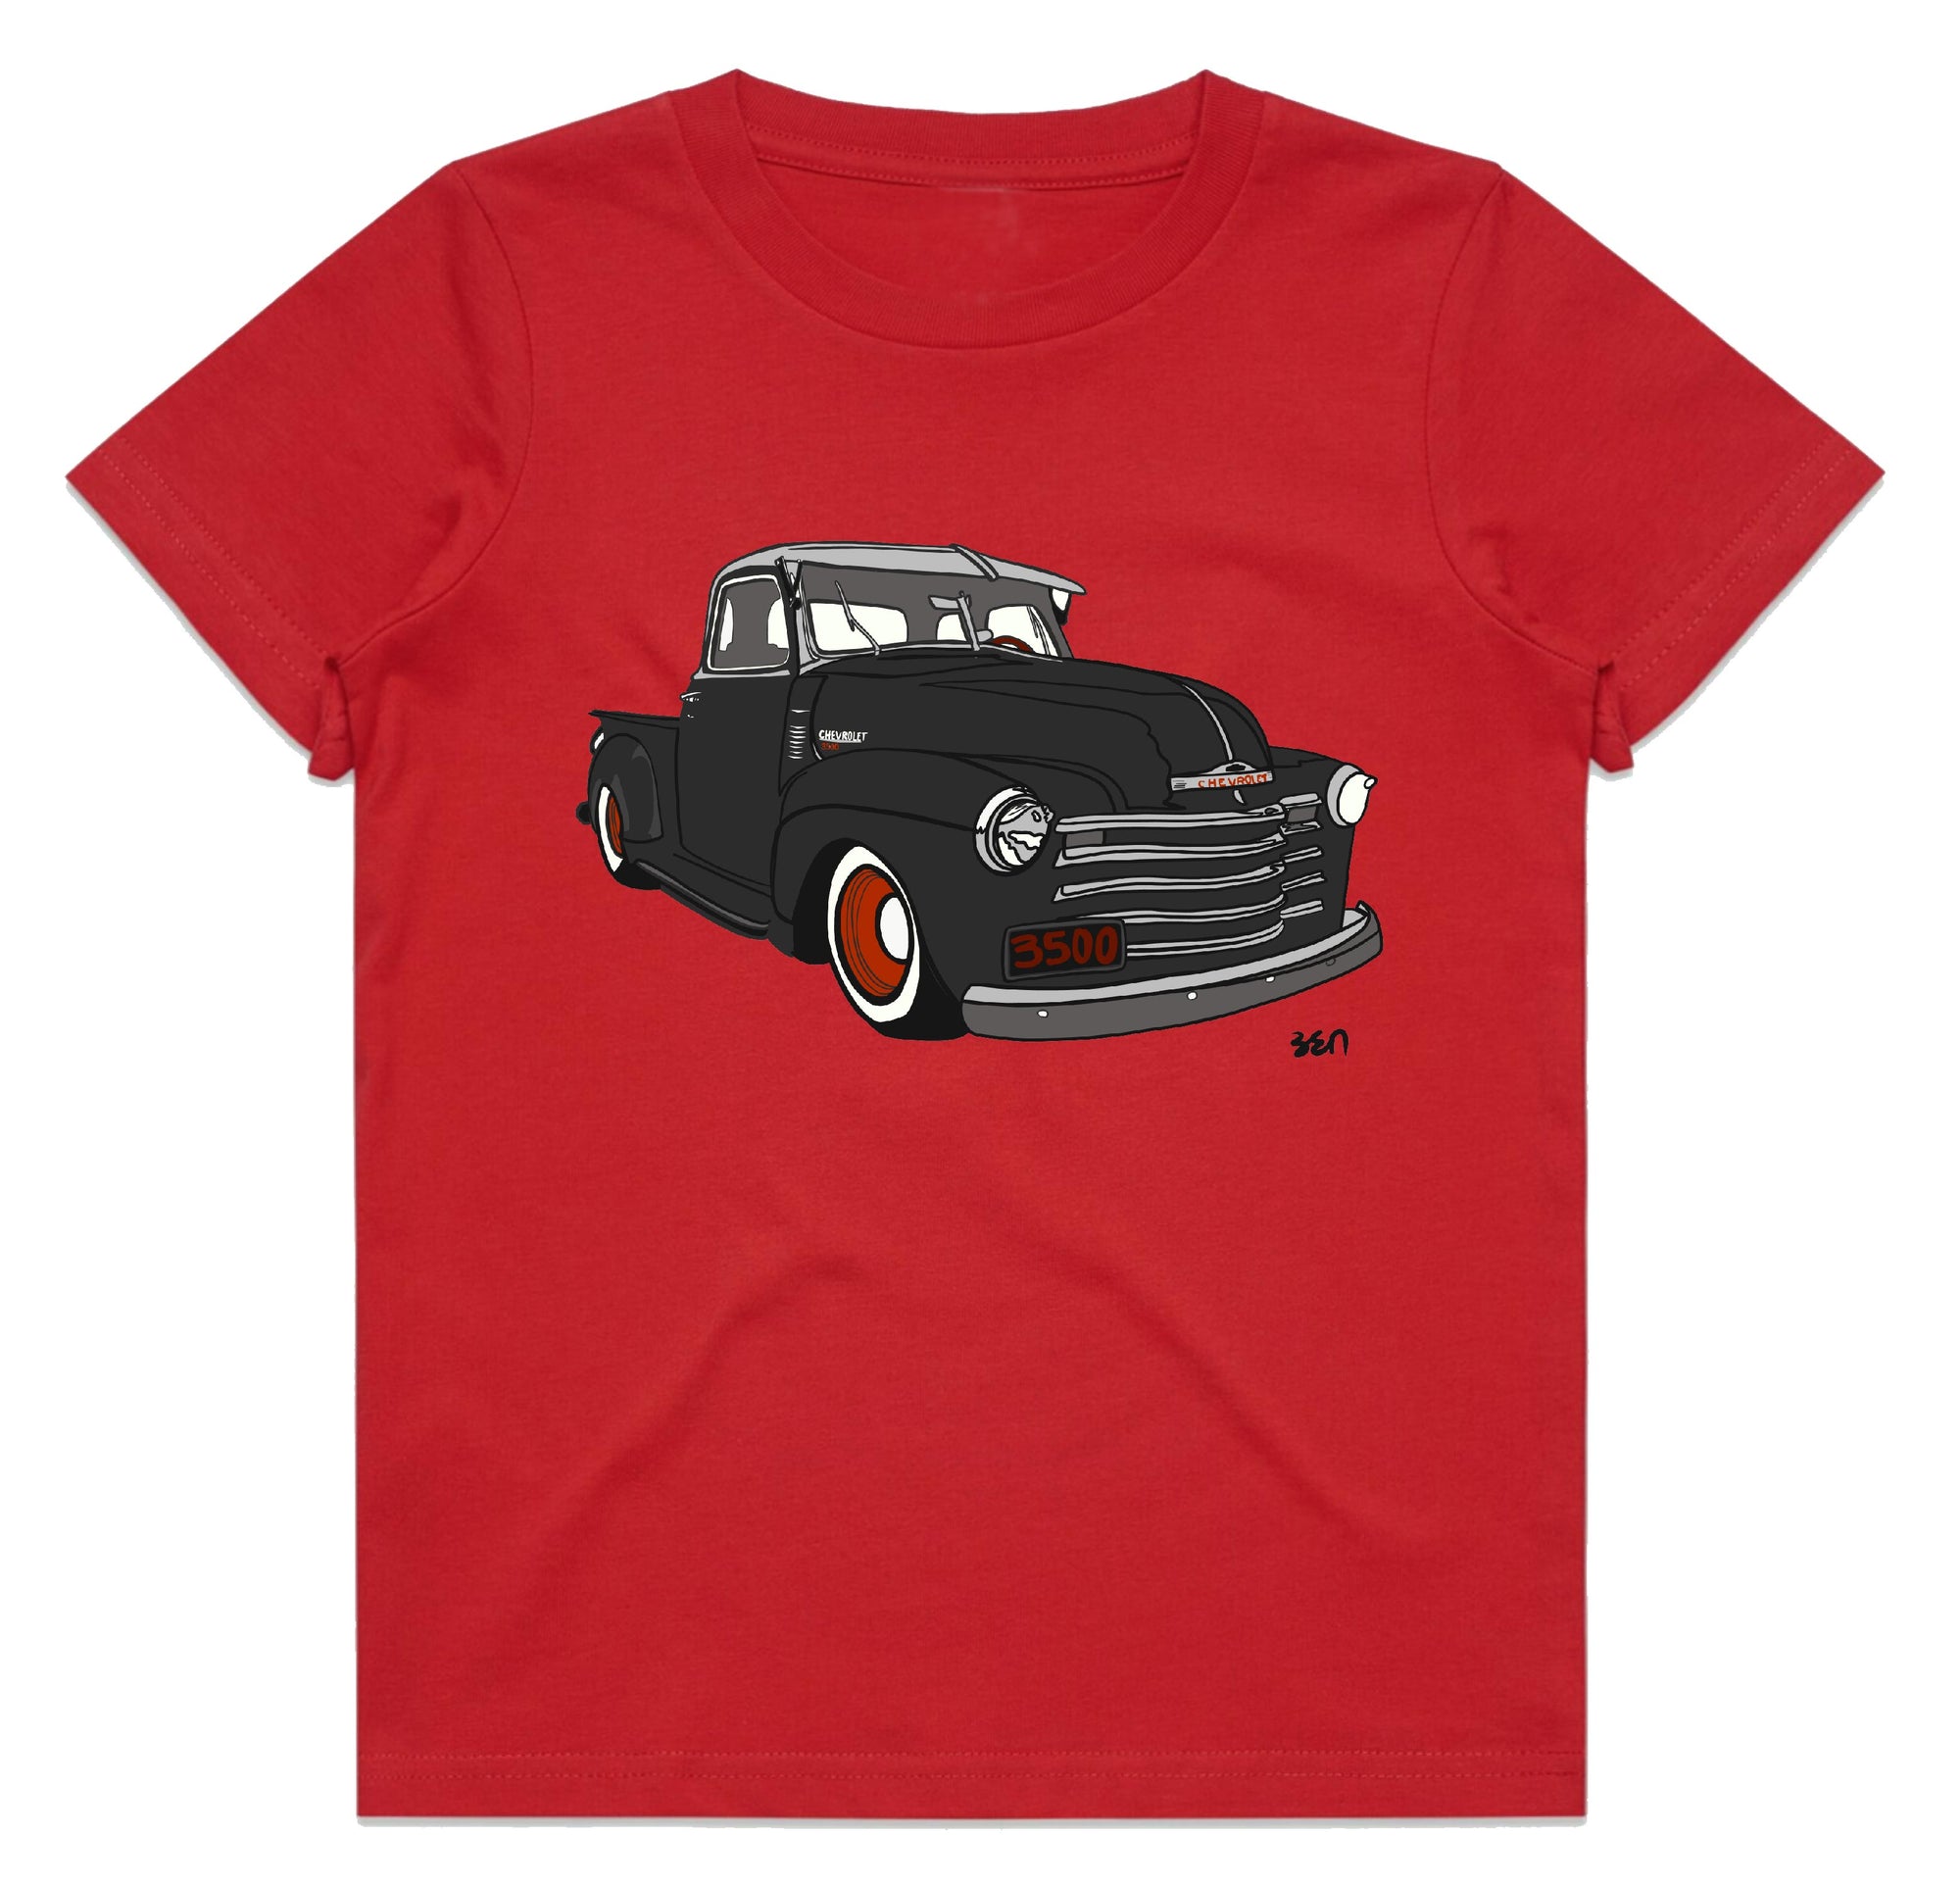 'RED CHEVY TRUCK' 50 CHEVROLET 'CHEVY' 3500 PICKUP TRUCK KIDS TEE